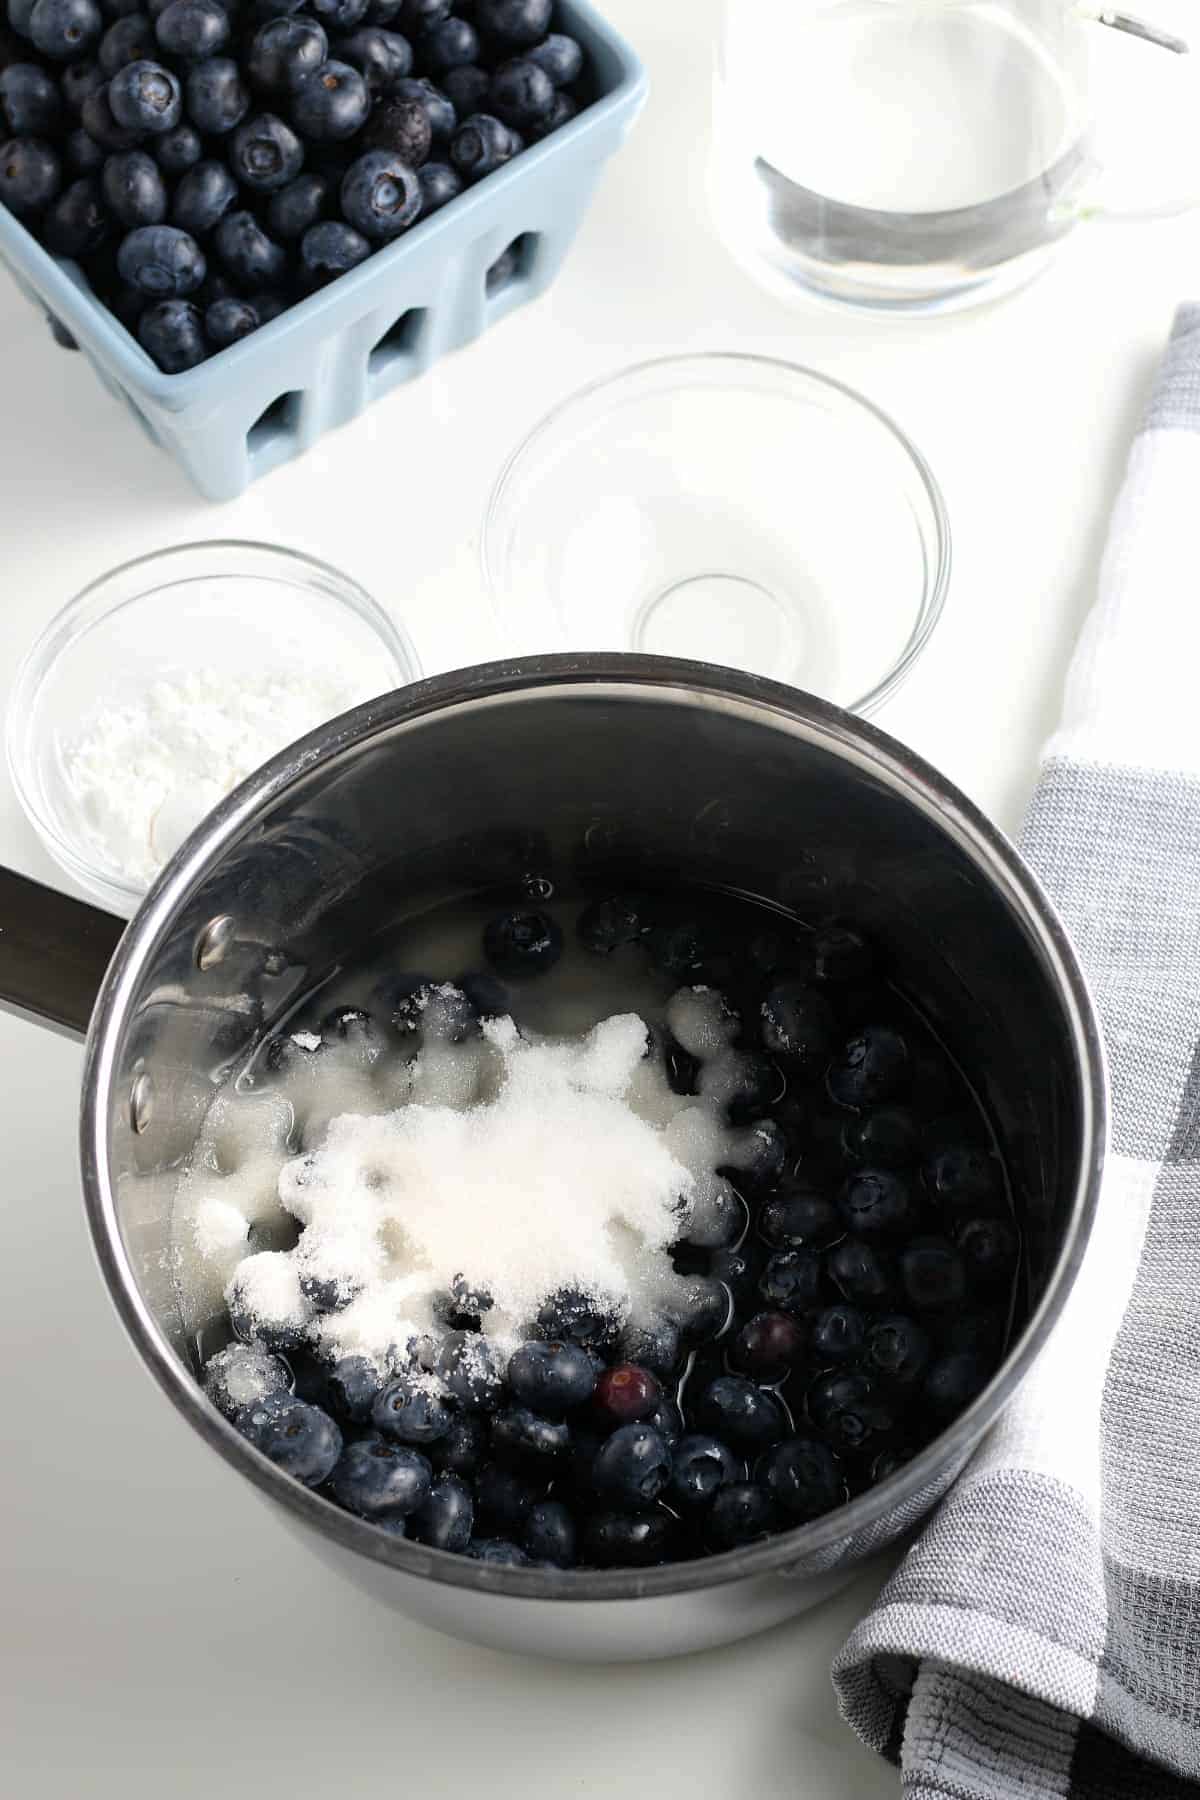 Blueberries and sugar in a saucepan ready to be cooked.